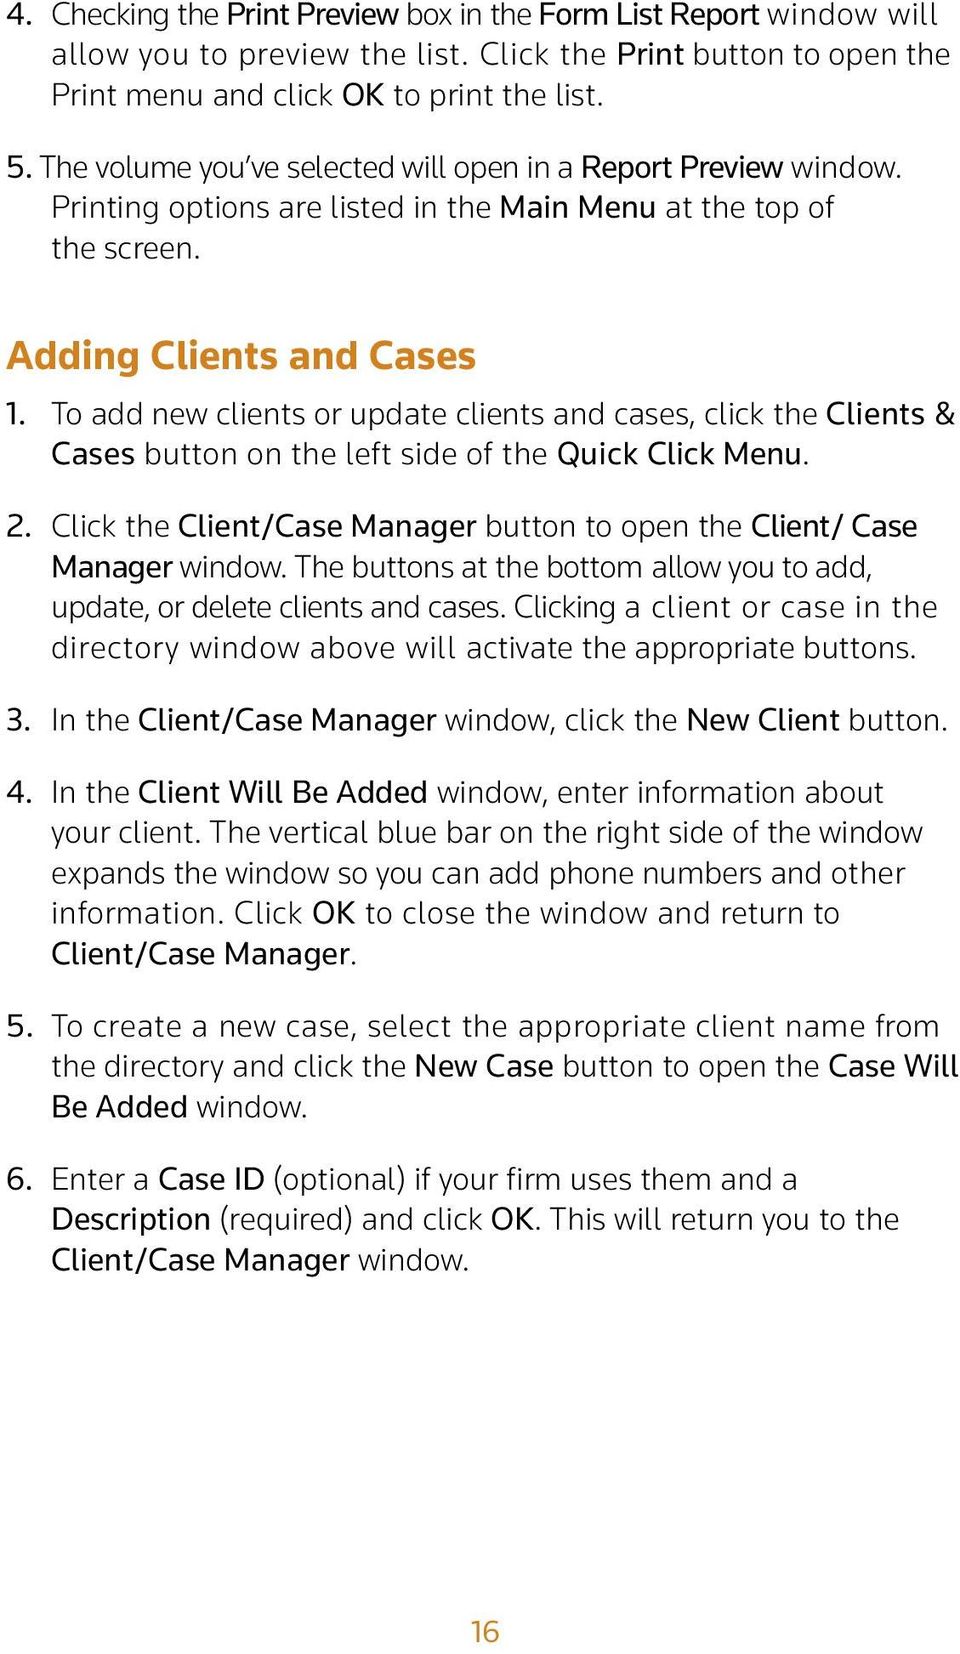 To add new clients or update clients and cases, click the Clients & Cases button on the left side of the Quick Click Menu. 2.